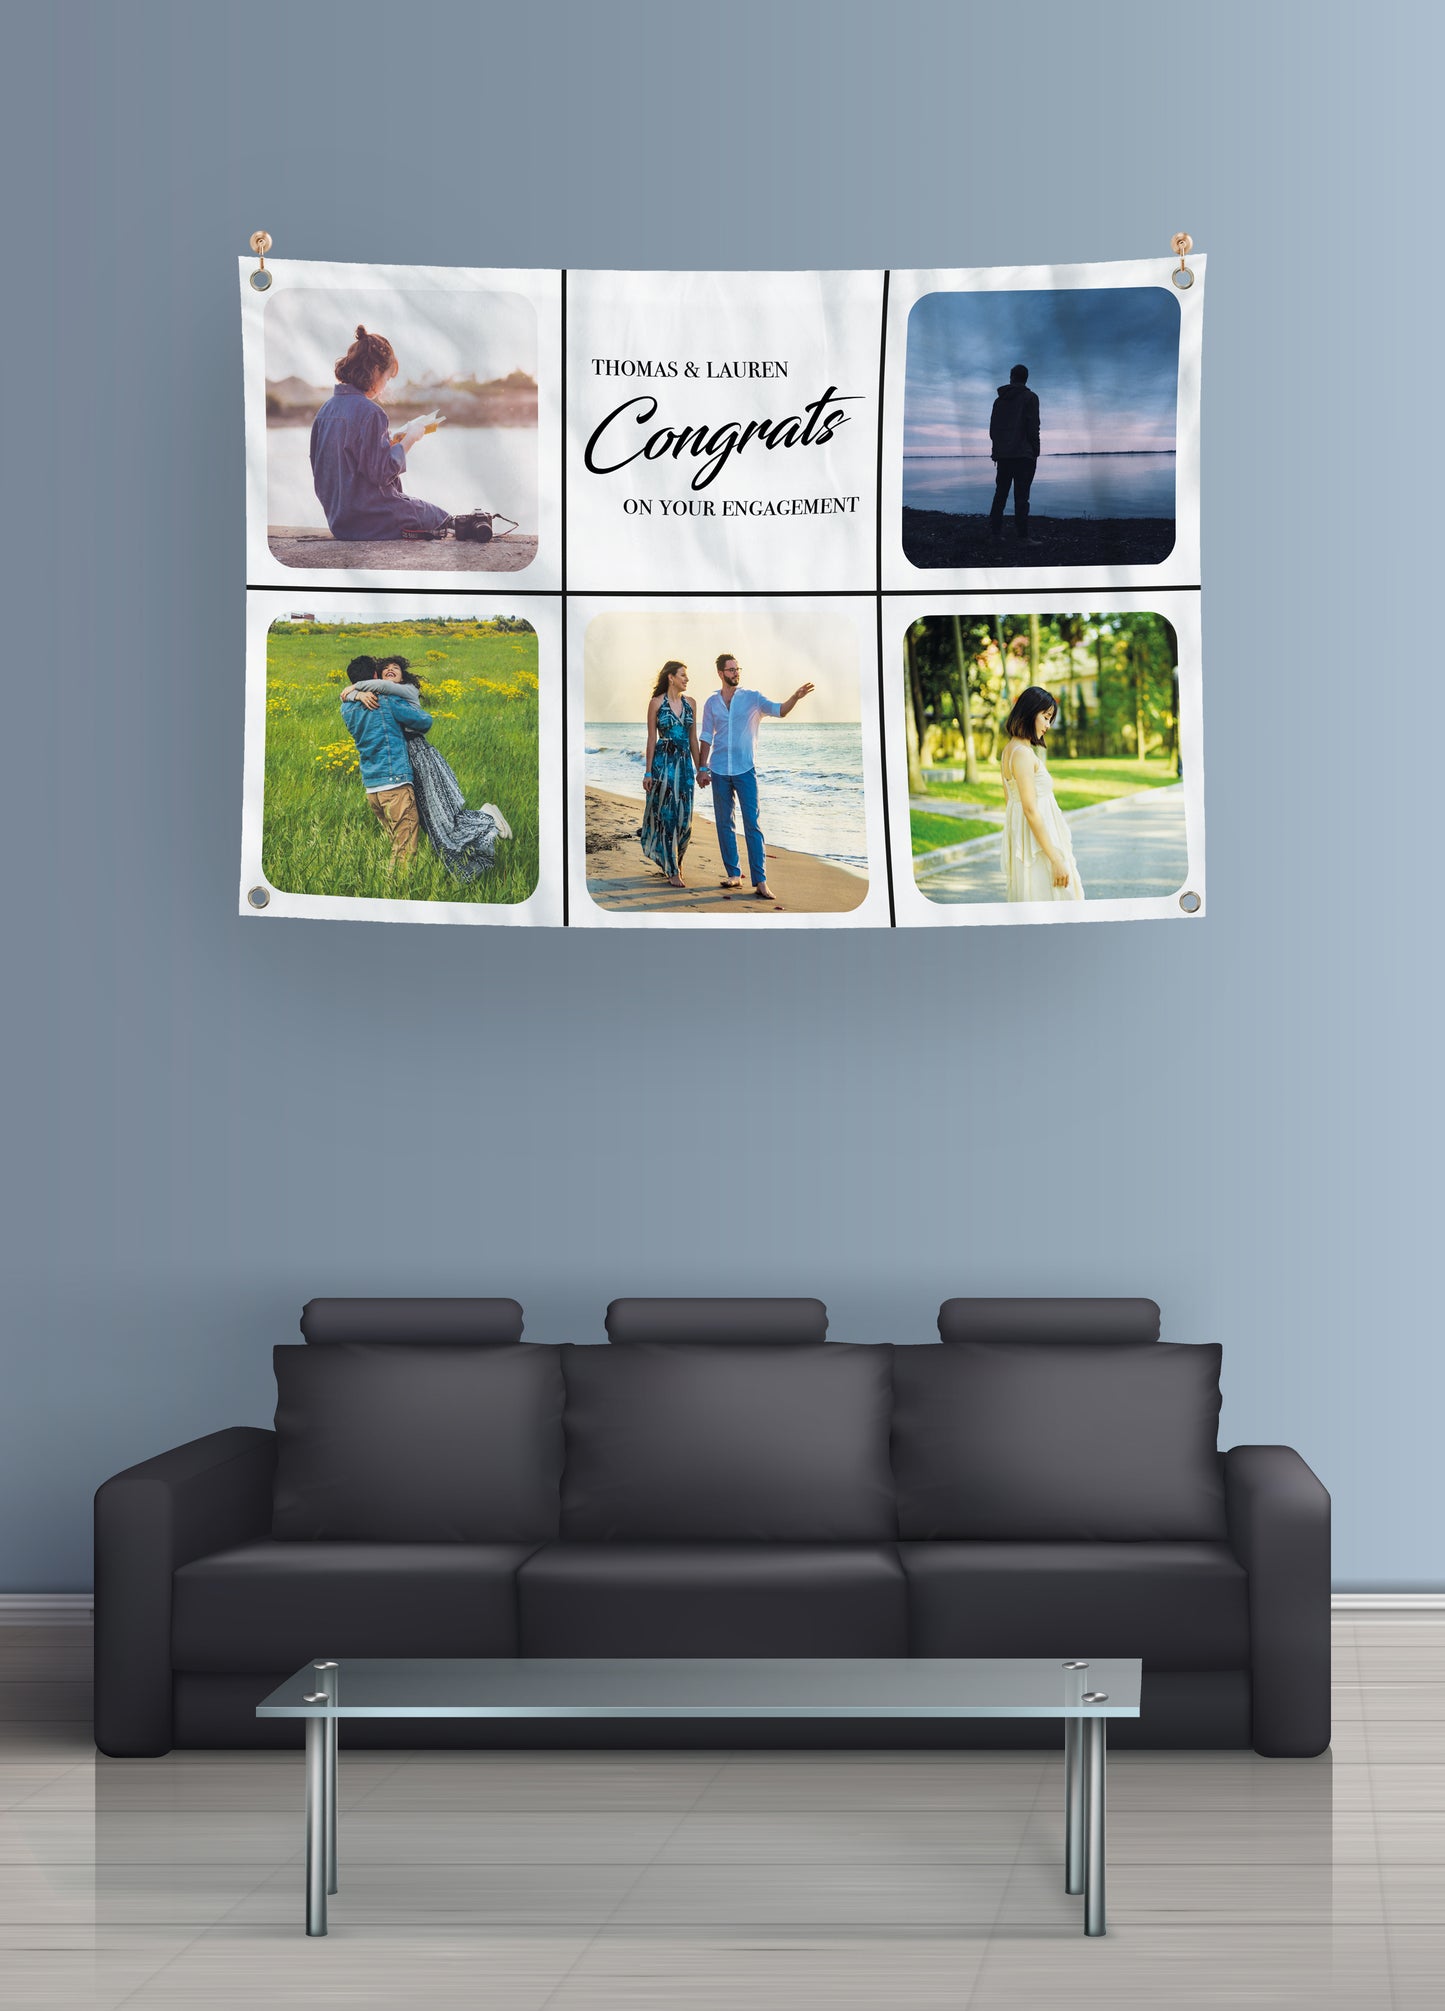 Personalised Photo Banner on Wall Above Sofa. Add Your Photos. Personalised Text. 'Thomas & Lauren Congrats on Your Engagement'.